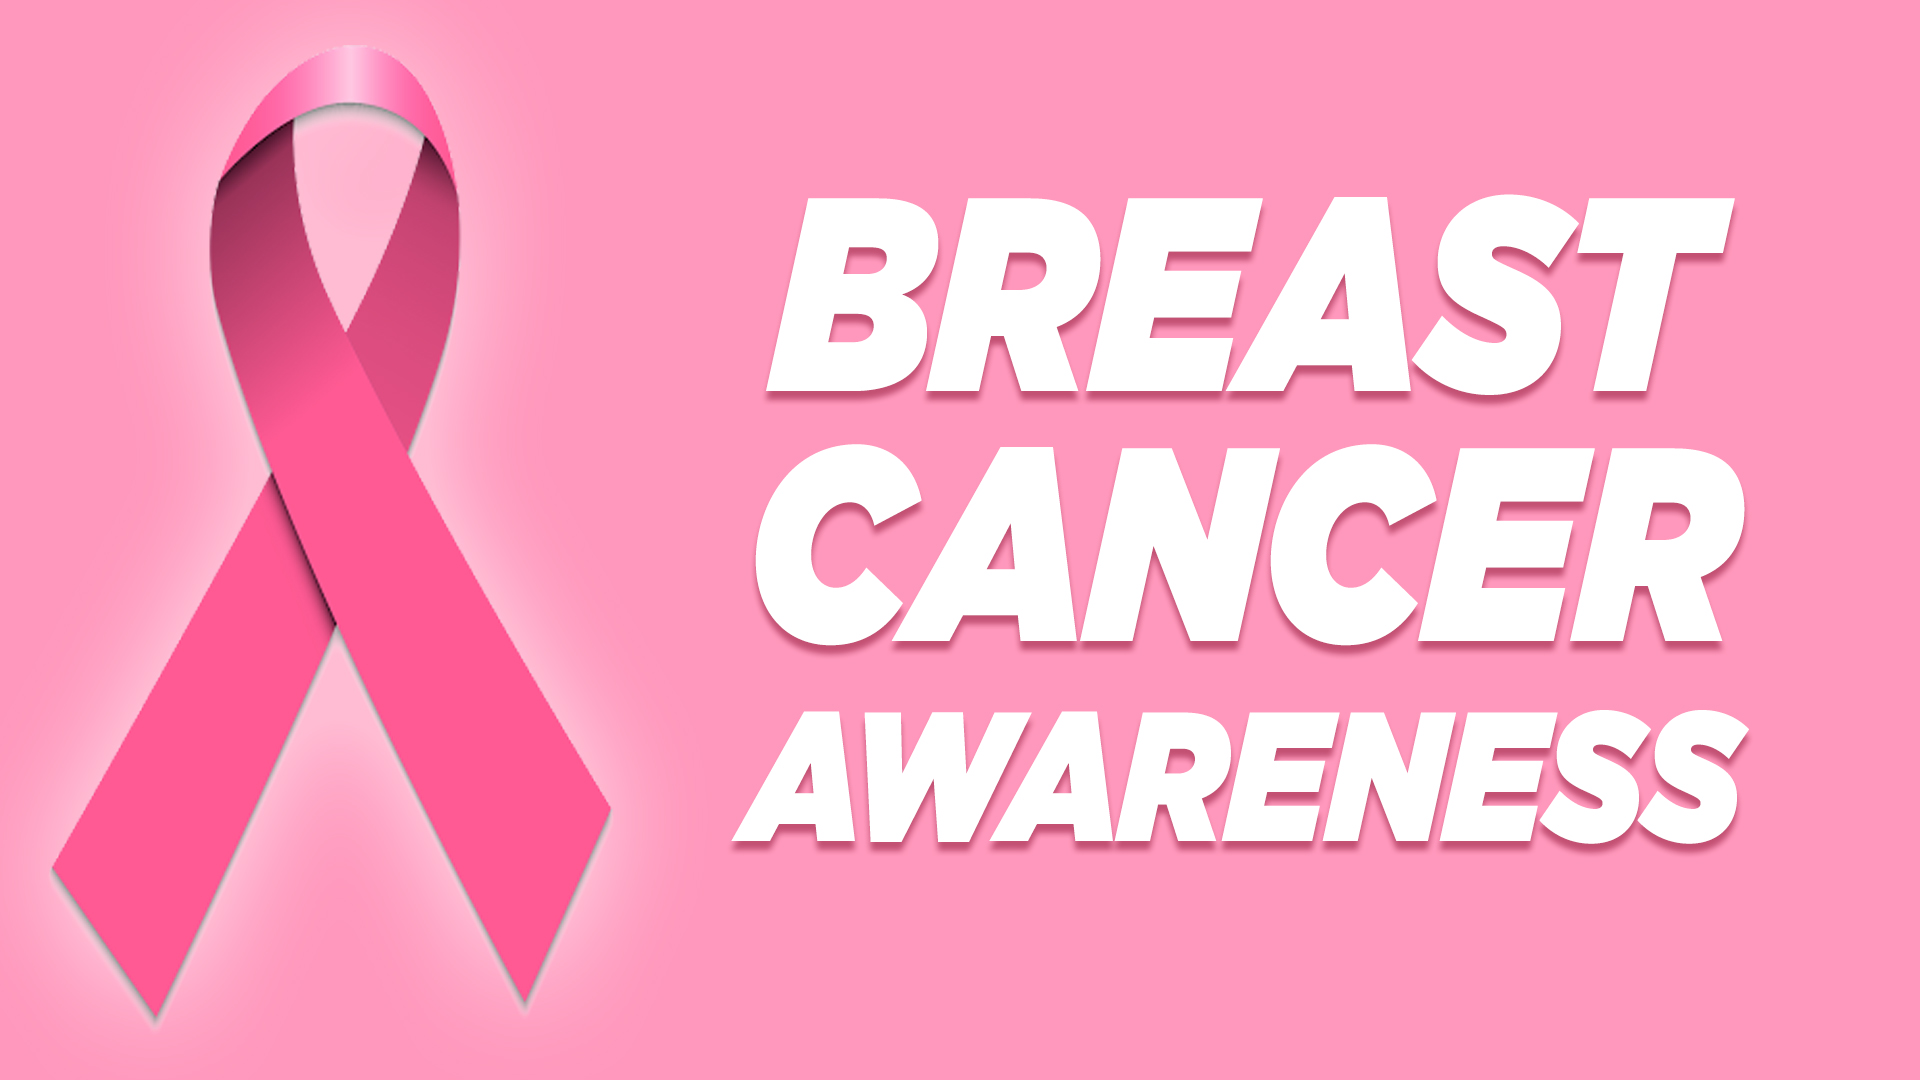 Prevention Tips for Breast Cancer Awareness Month